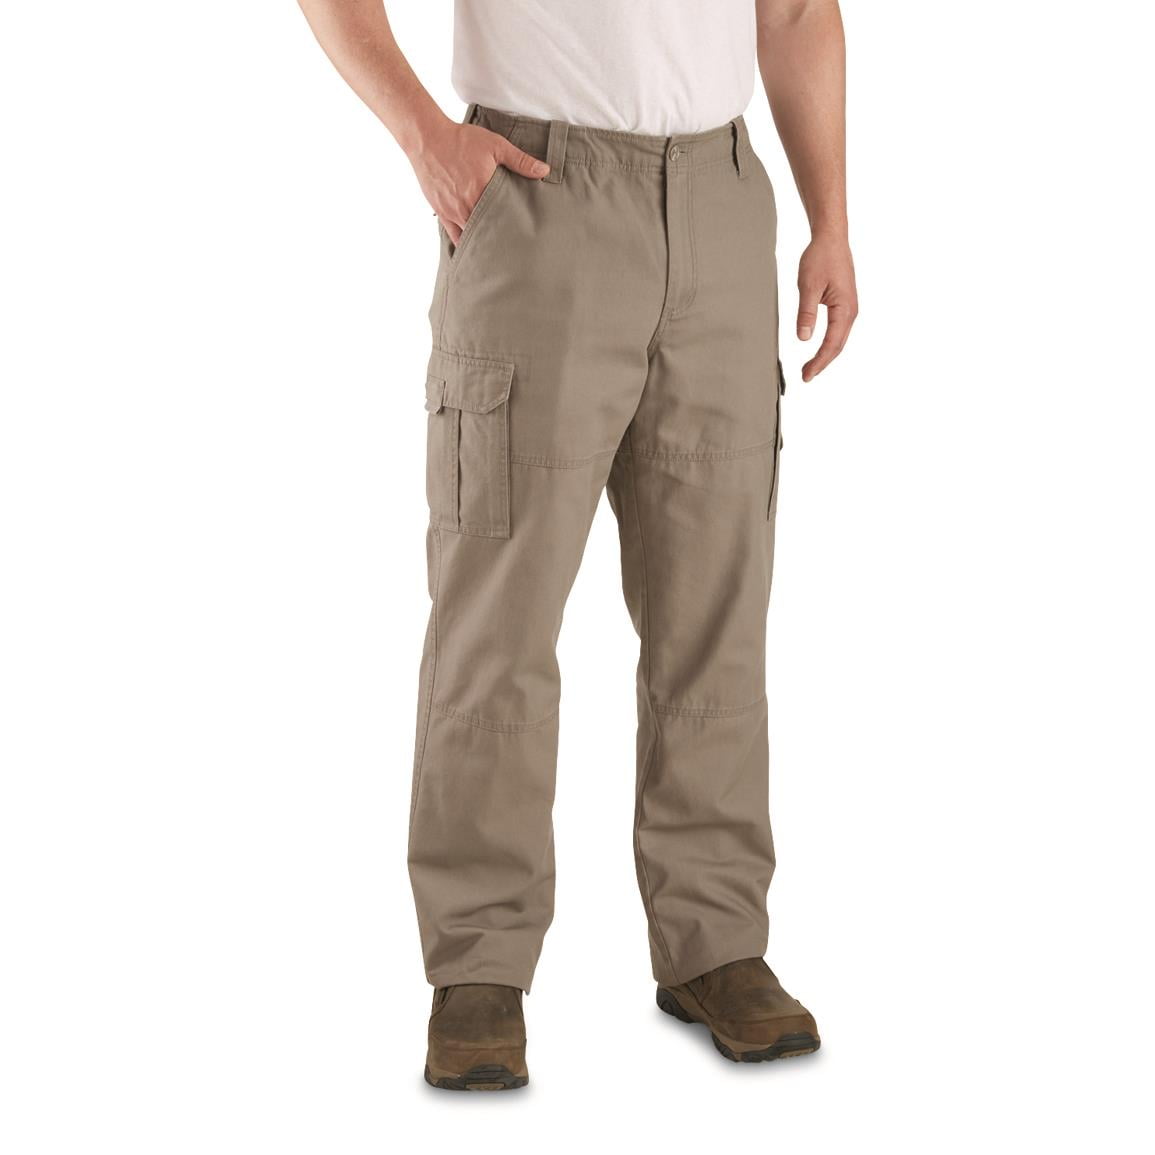 Aggregate more than 132 flannel lined cargo pants best - in.eteachers